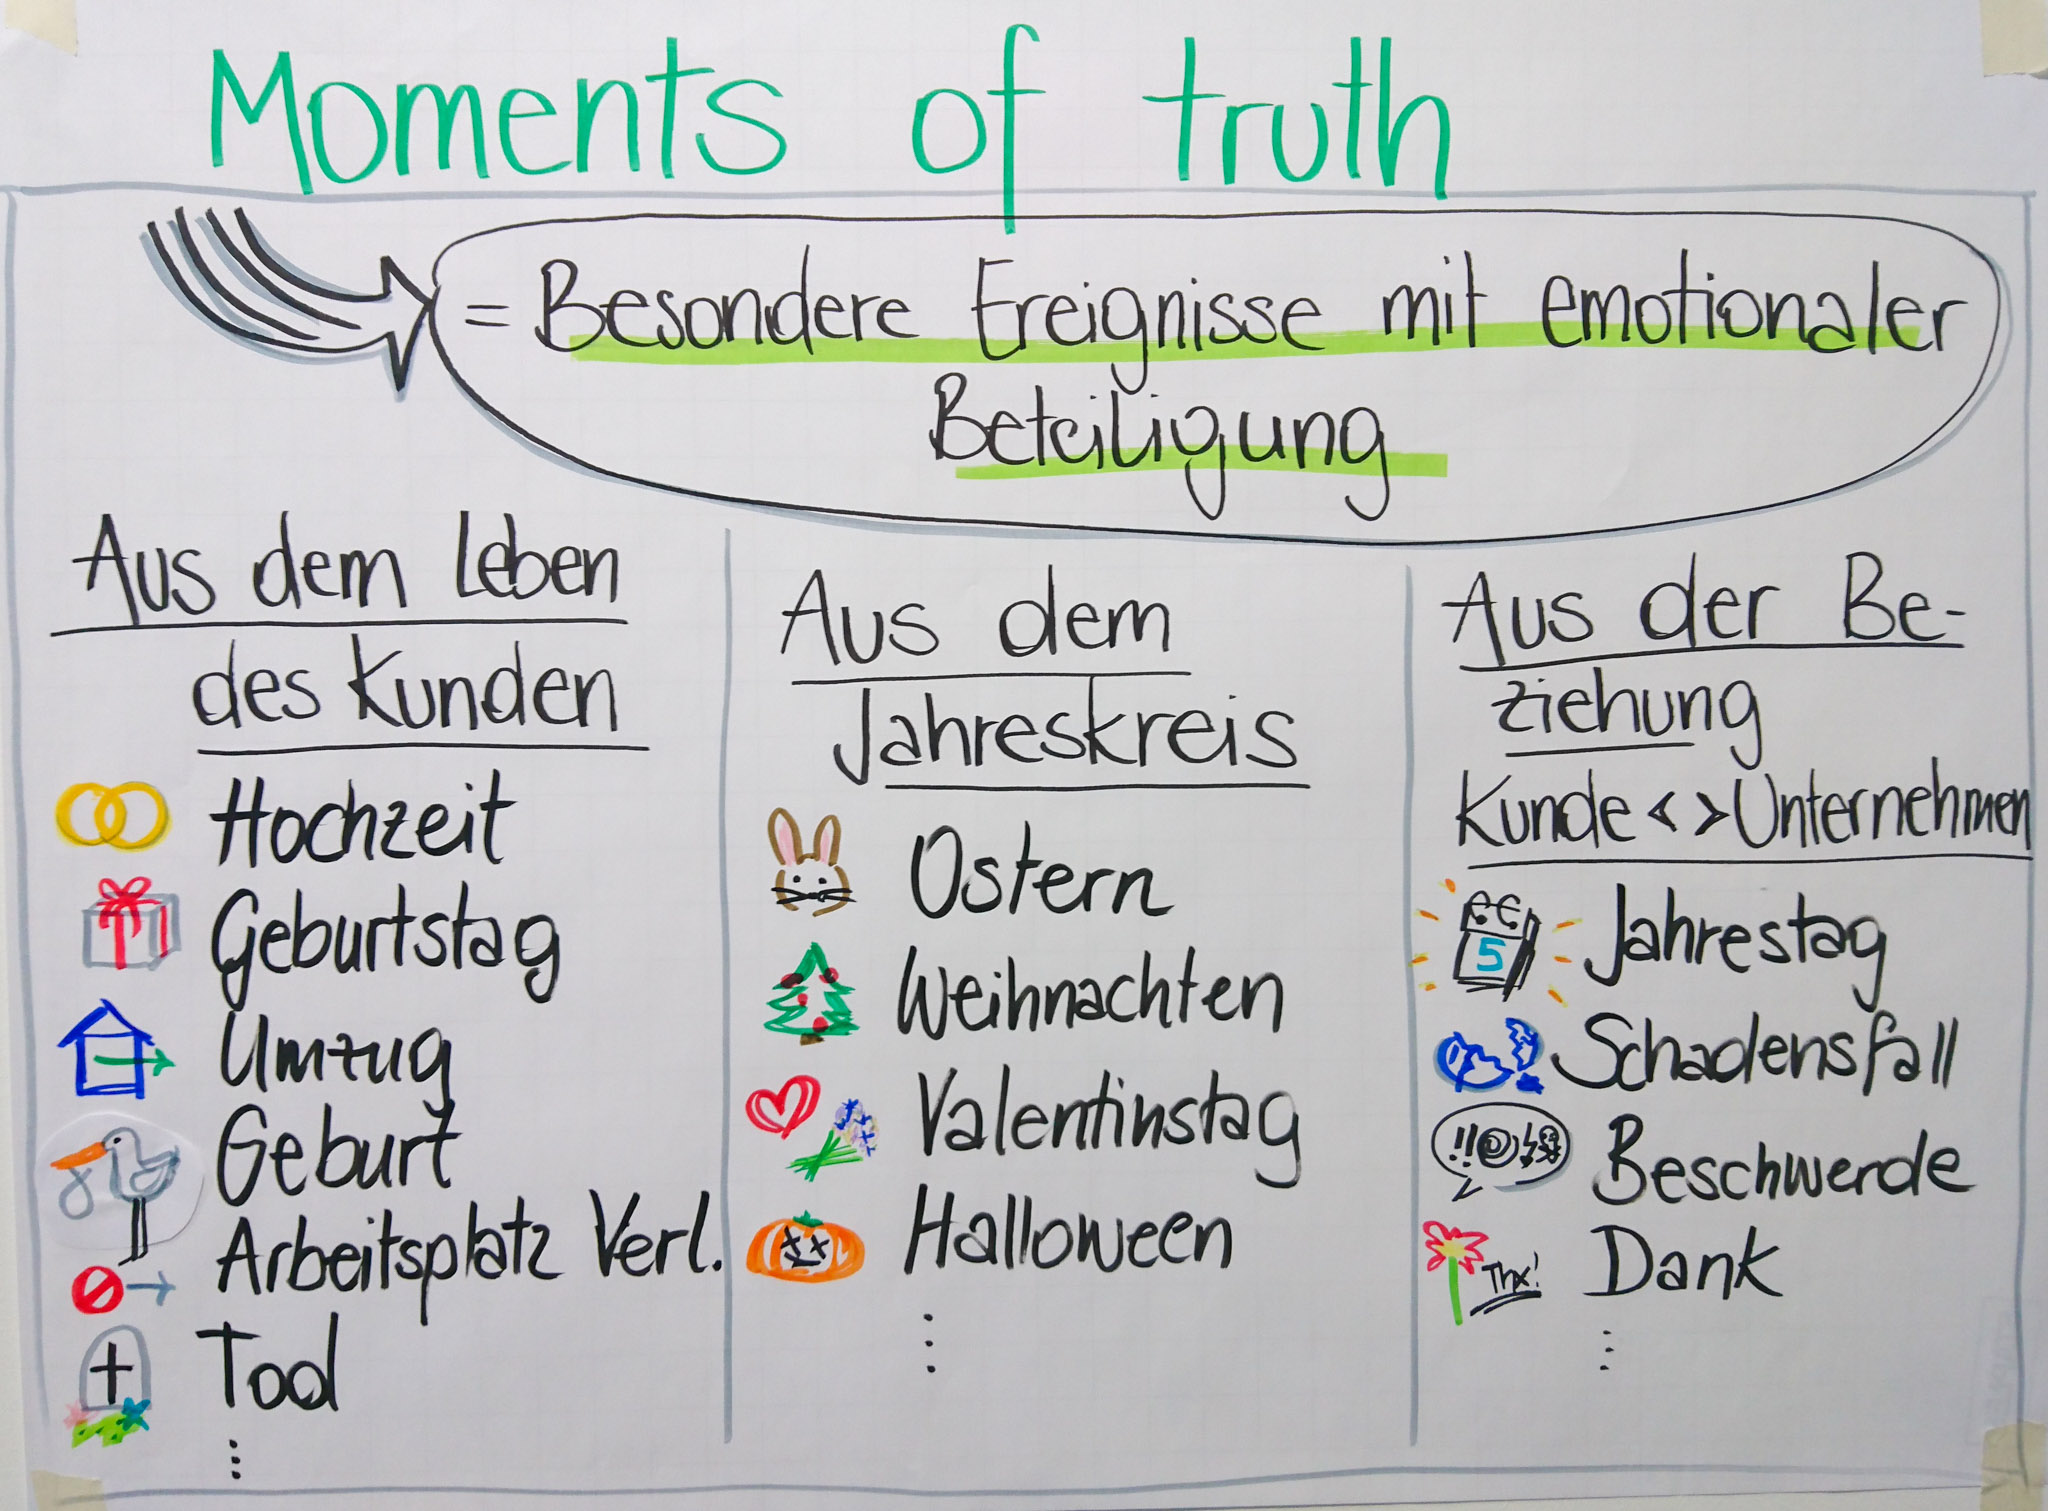 Moments of truth Beispiele